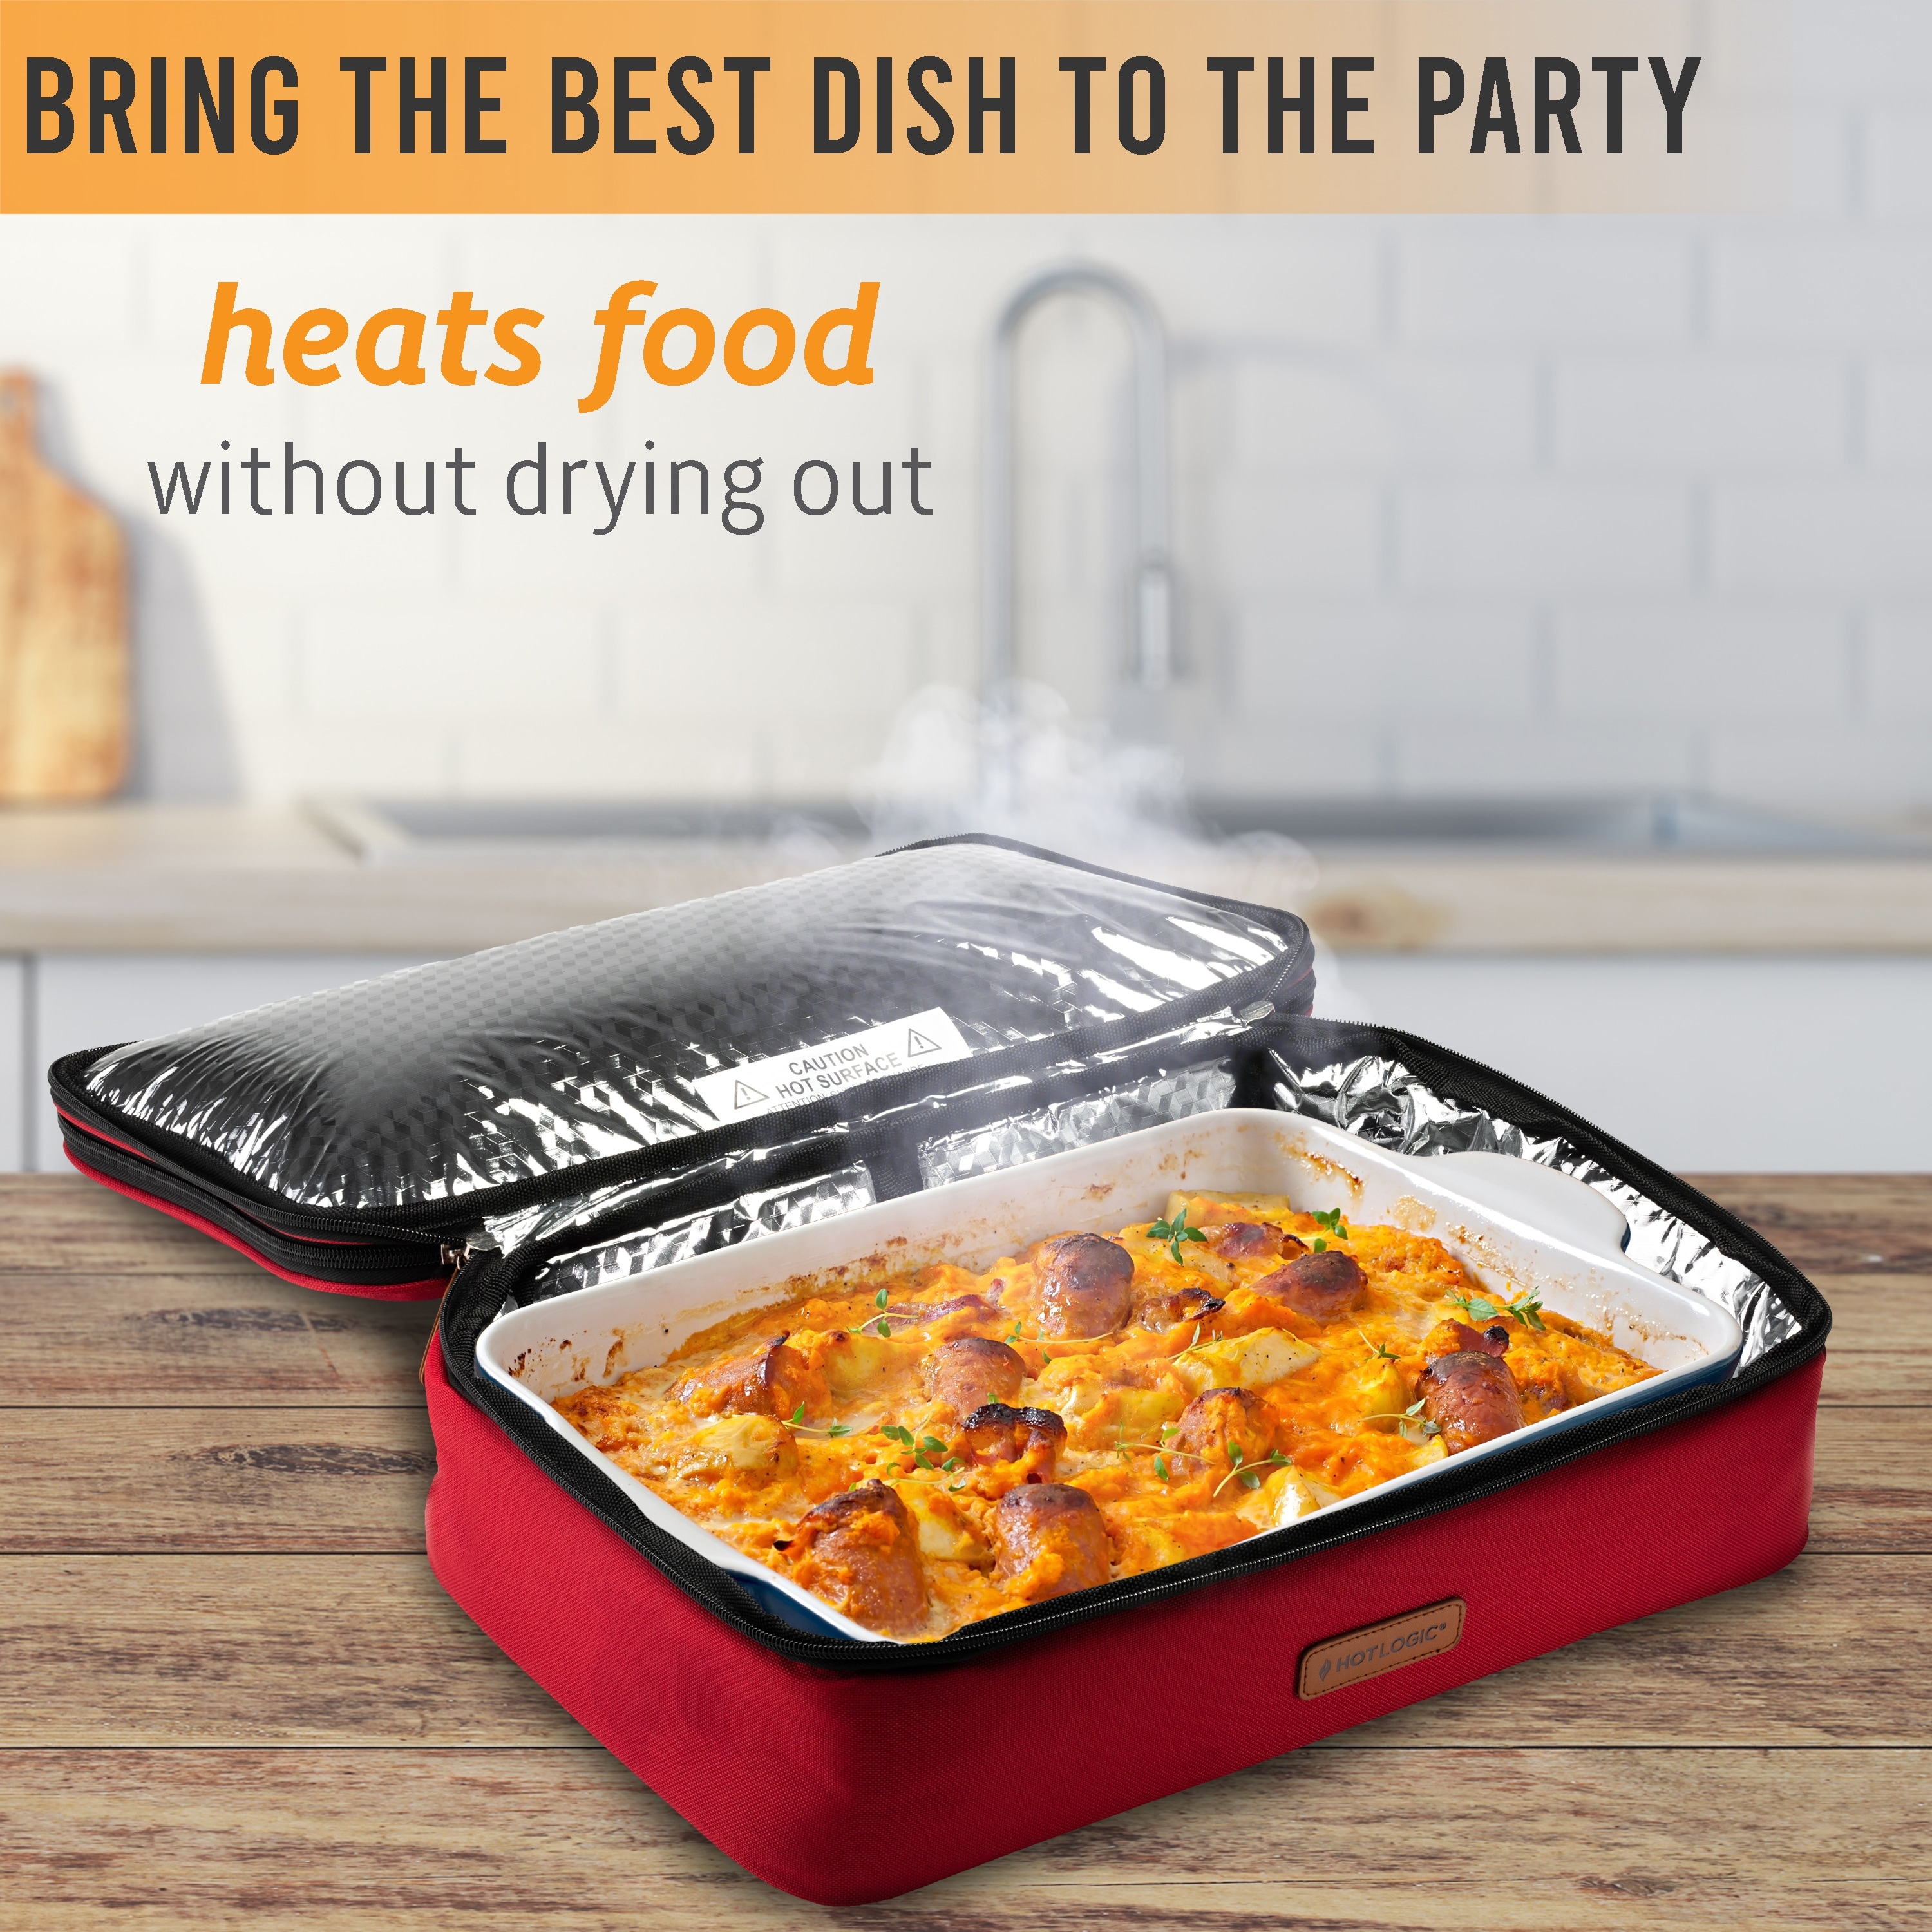 https://ak1.ostkcdn.com/images/products/is/images/direct/7be3c5a038c16107974058a55a9dae447f548fd4/HOTLOGIC-16801170-BLK-Portable-Casserole-Expandable-Max-Oven-XP%2C-Black.jpg